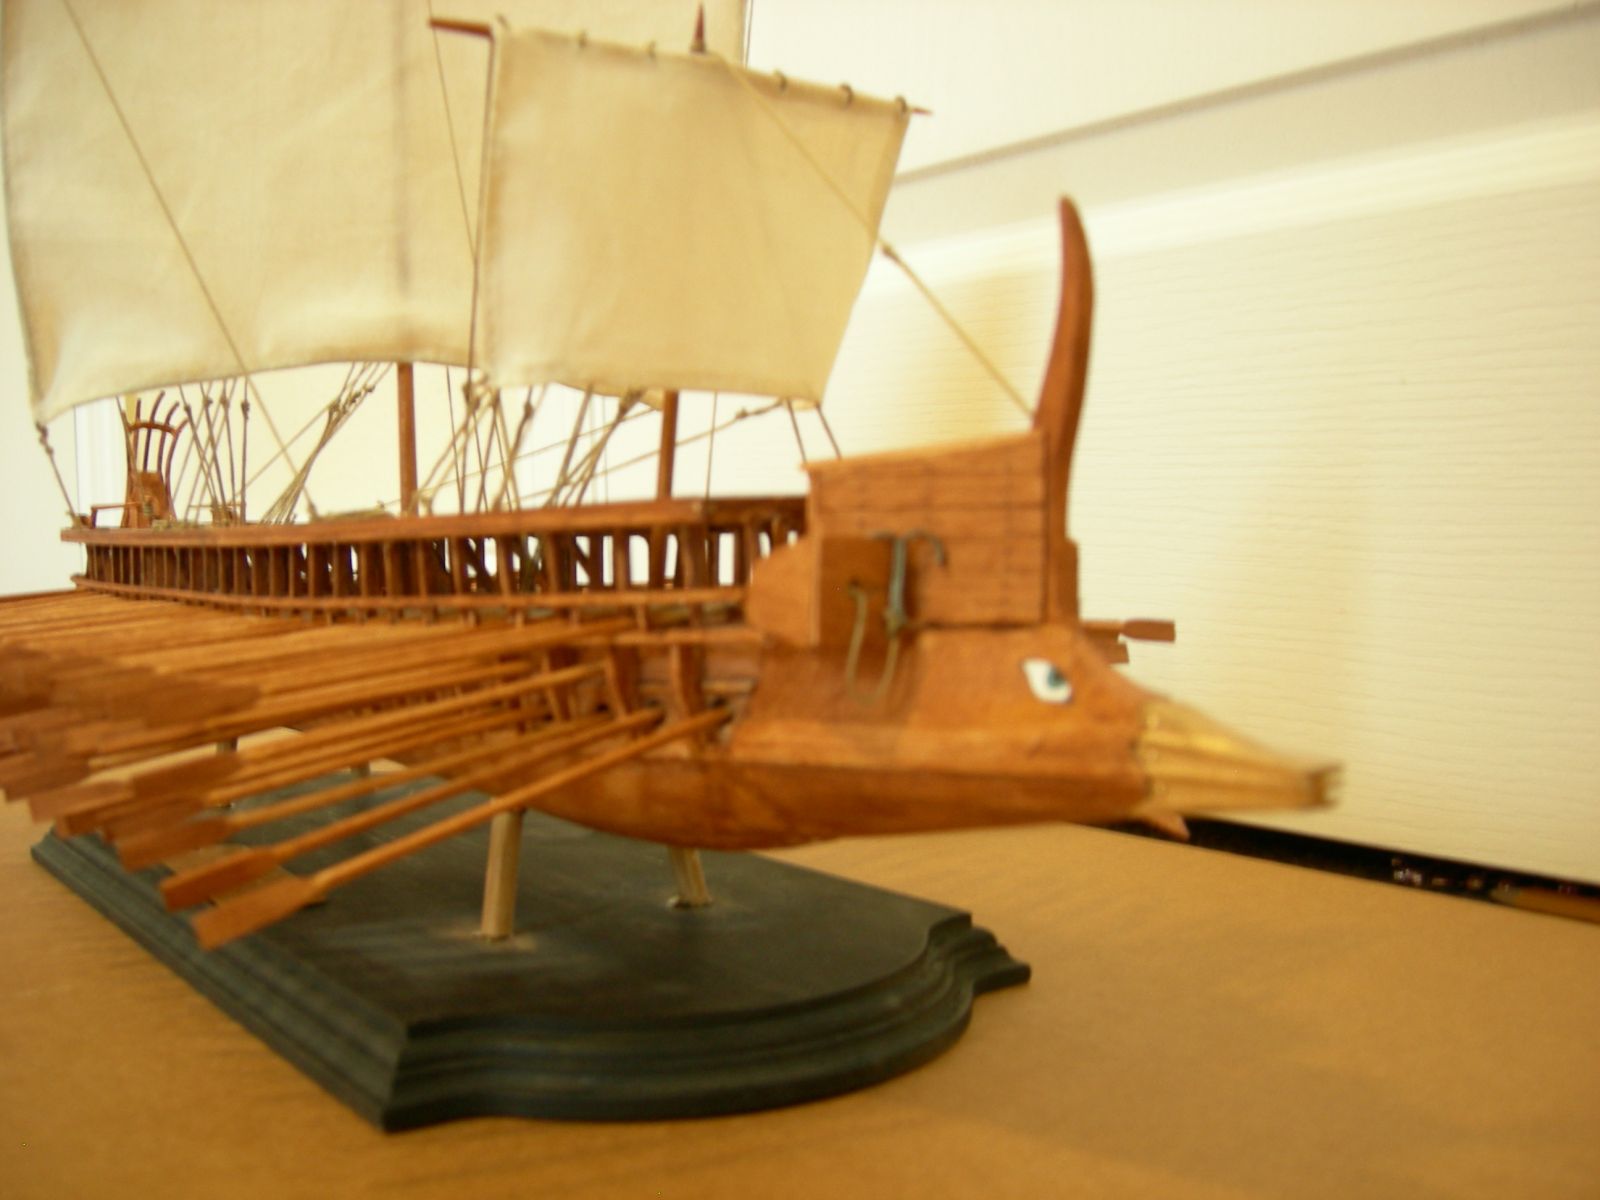 Trireme from front